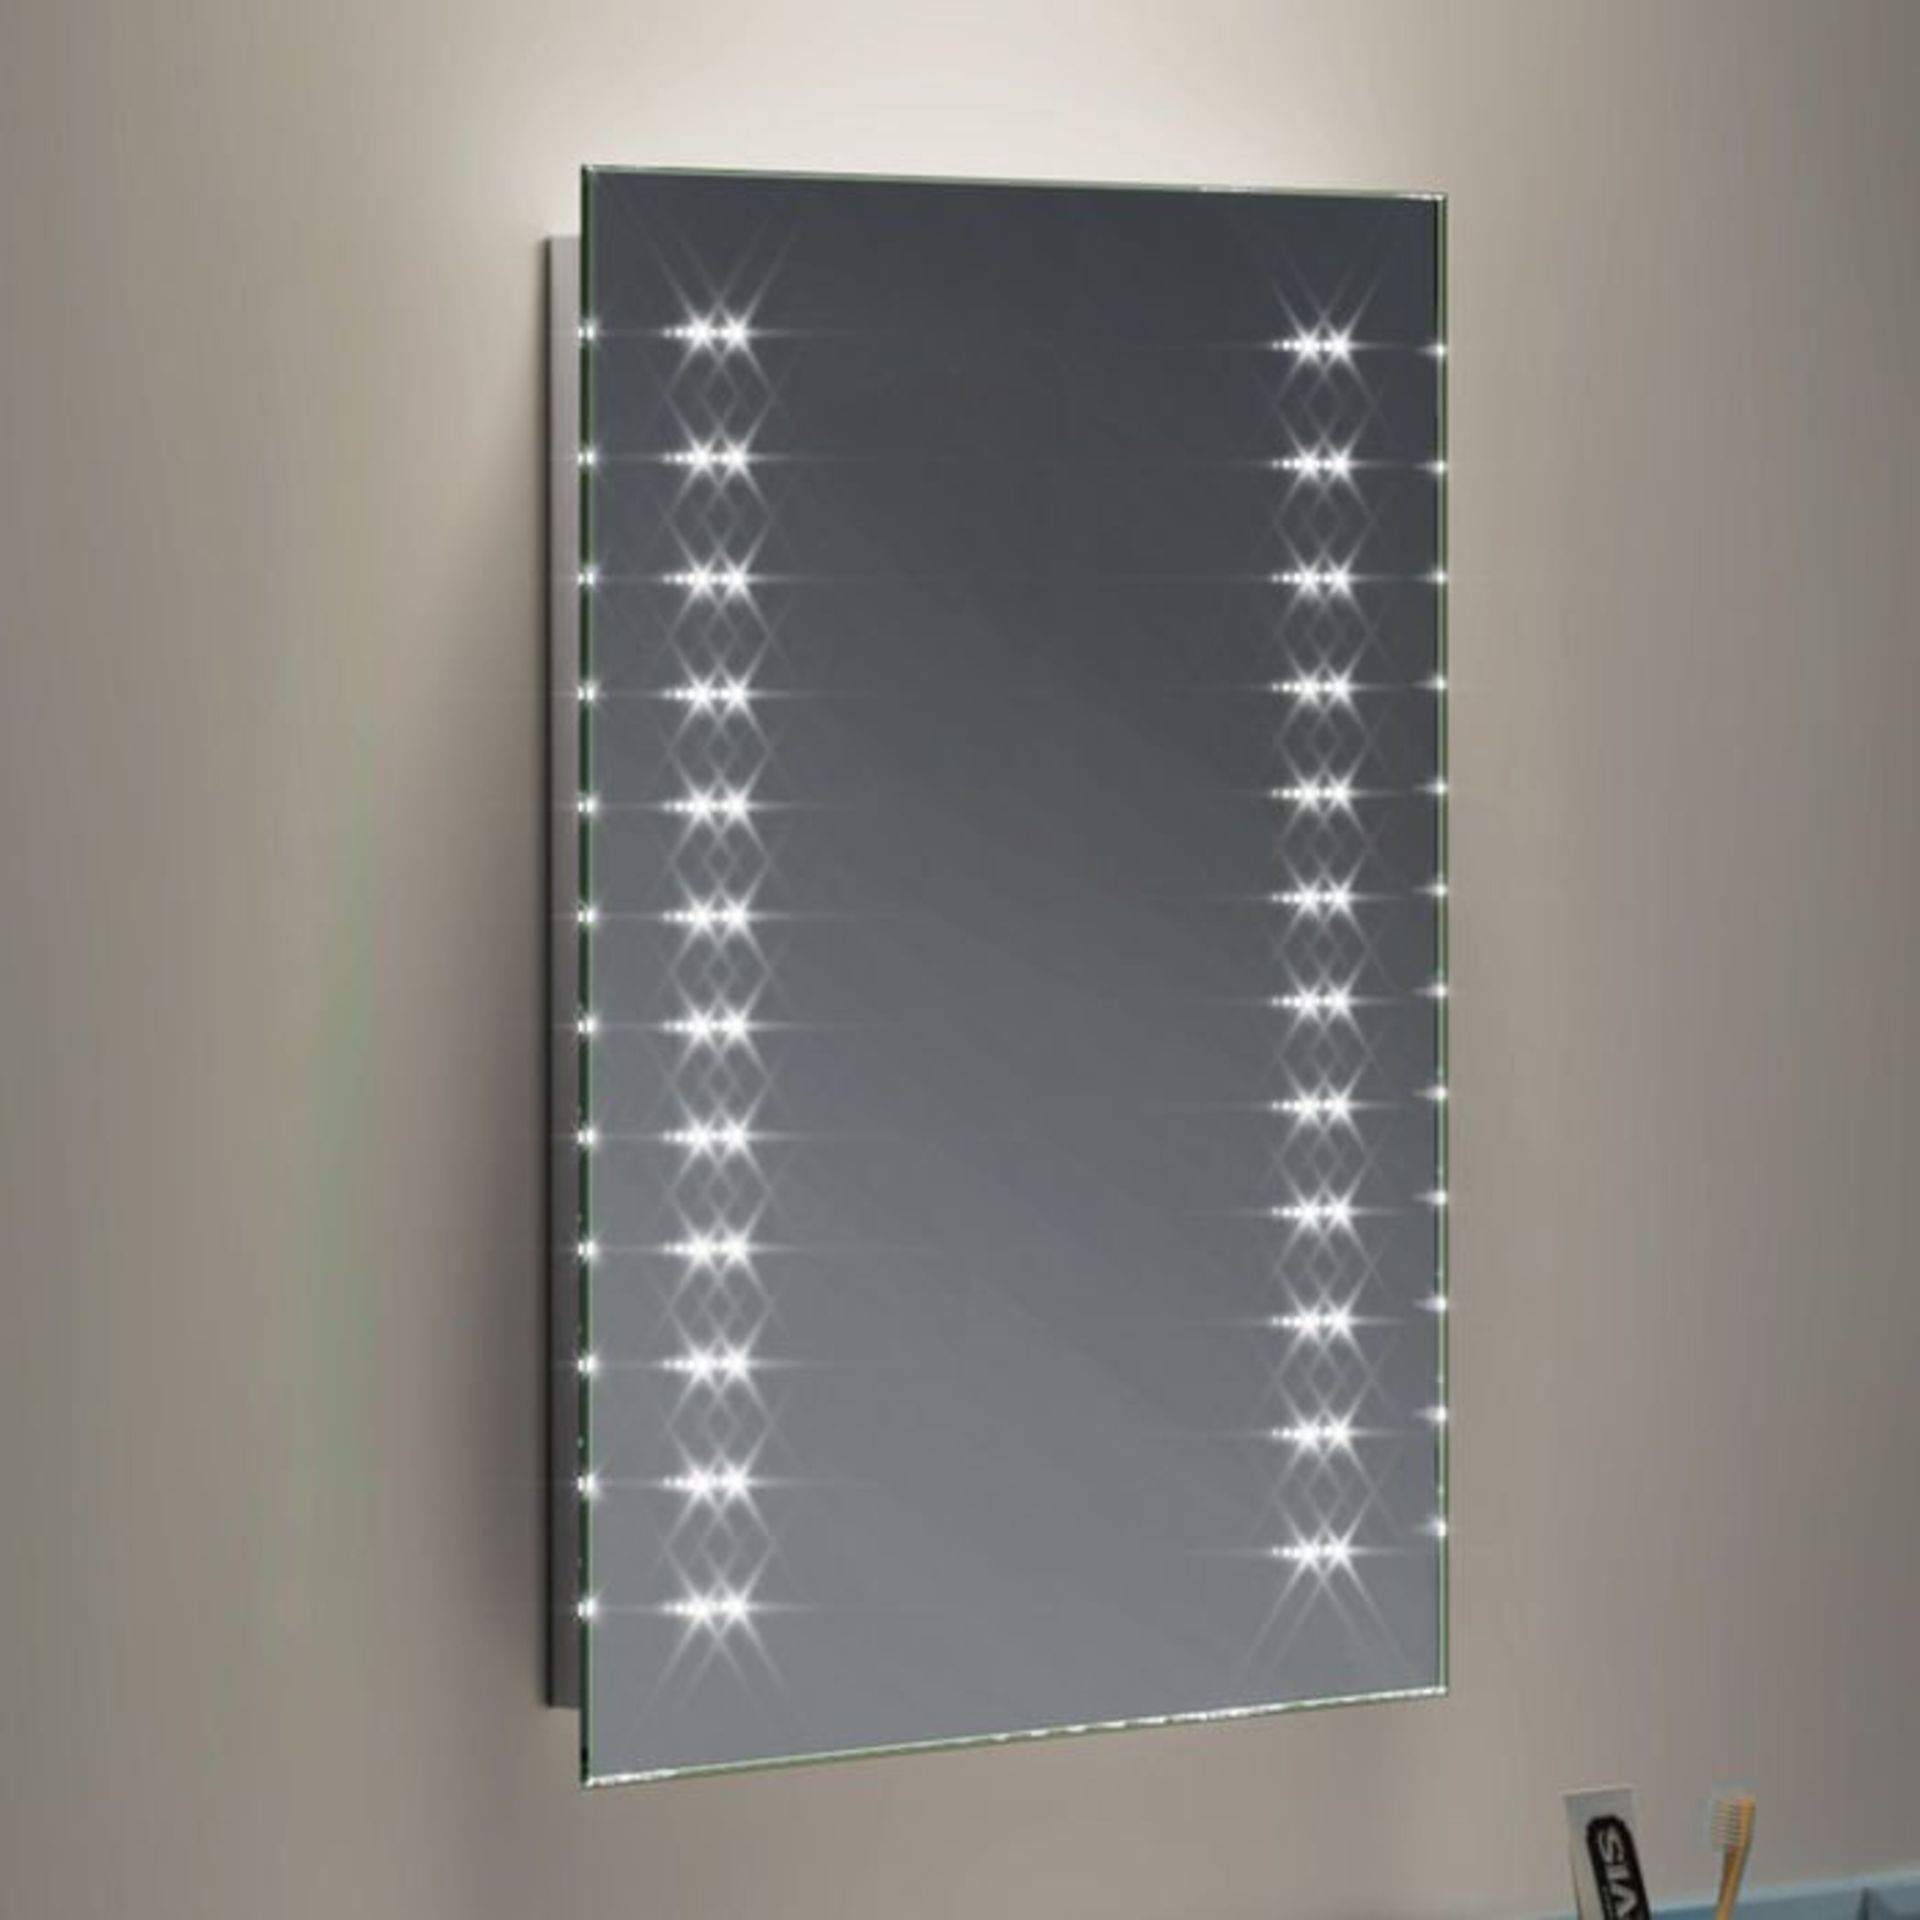 (J234) 390x500mm Galactic LED Mirror - Battery Operated. RRP £249.99. Energy saving controlled